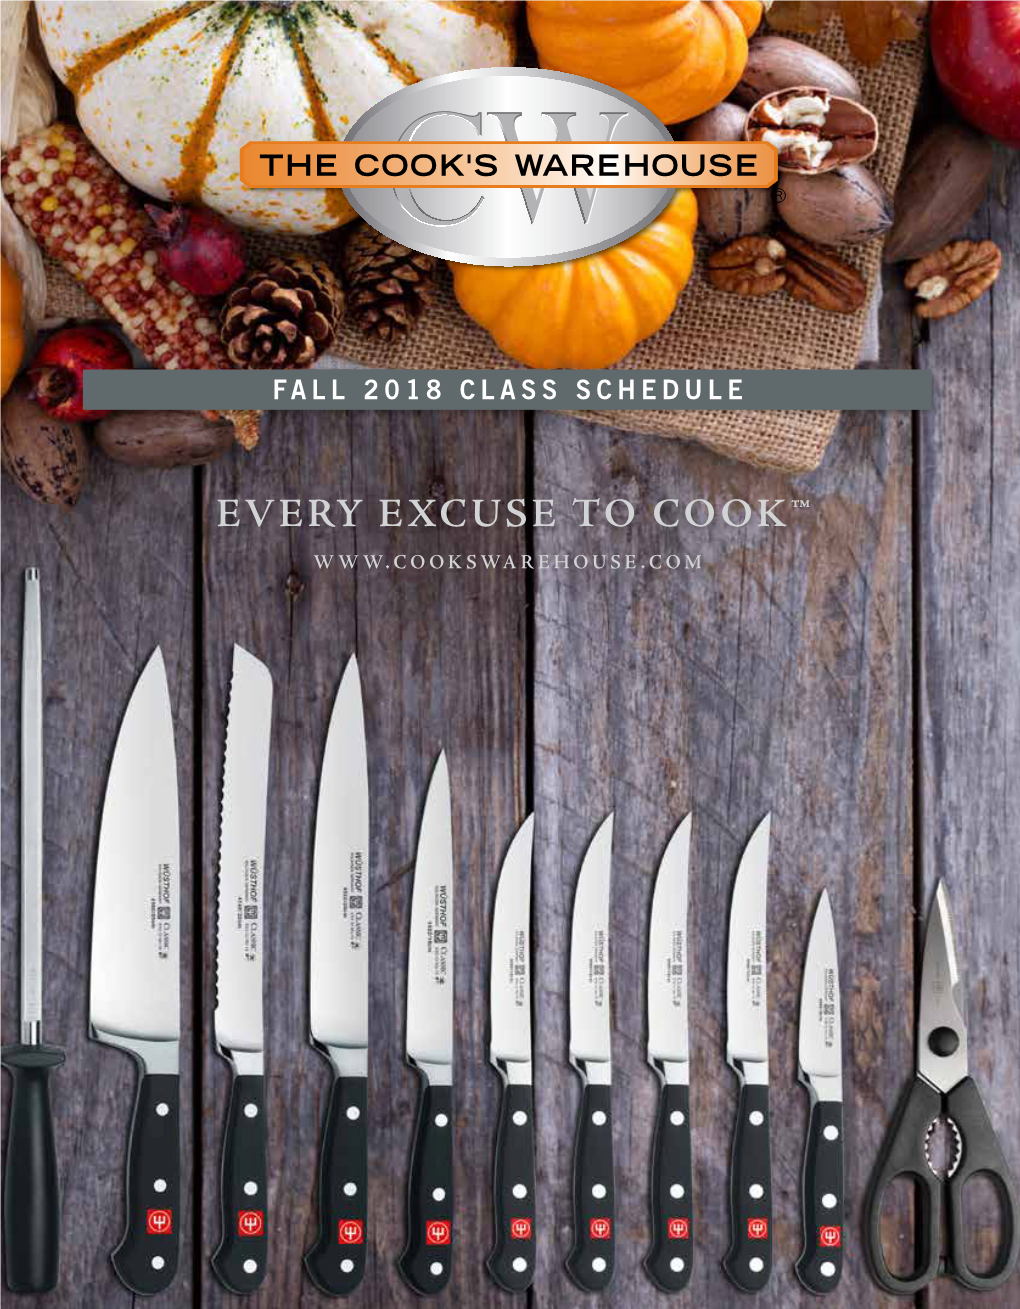 Every Excuse to Cook™ Spotlight on New Chefs